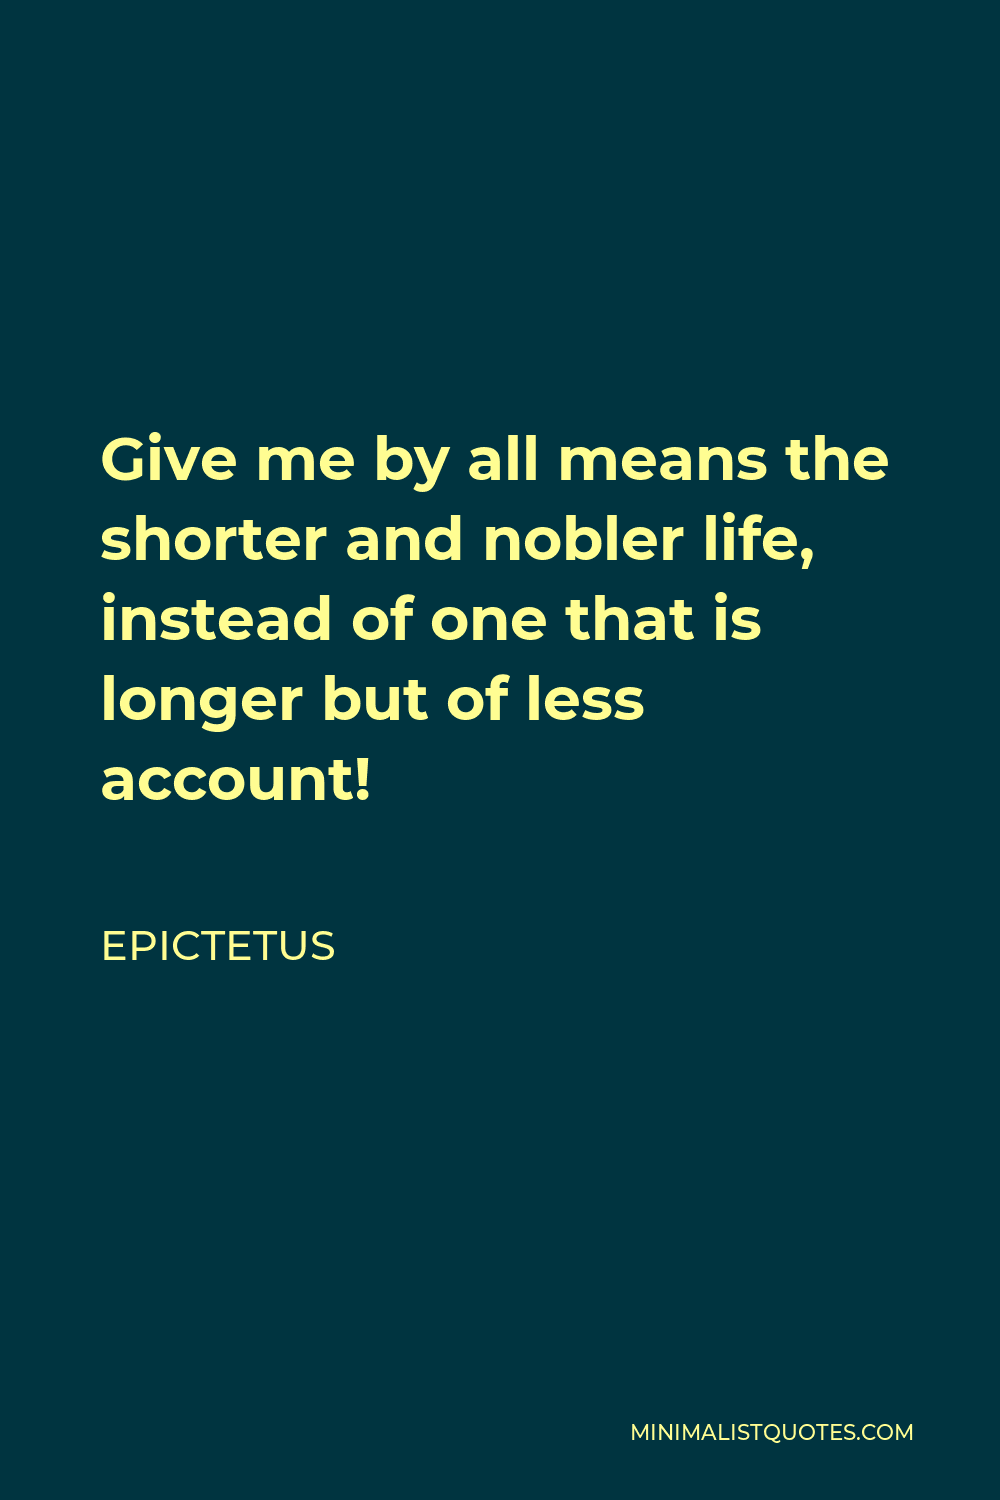 Epictetus Quote - Give me by all means the shorter and nobler life, instead of one that is longer but of less account!